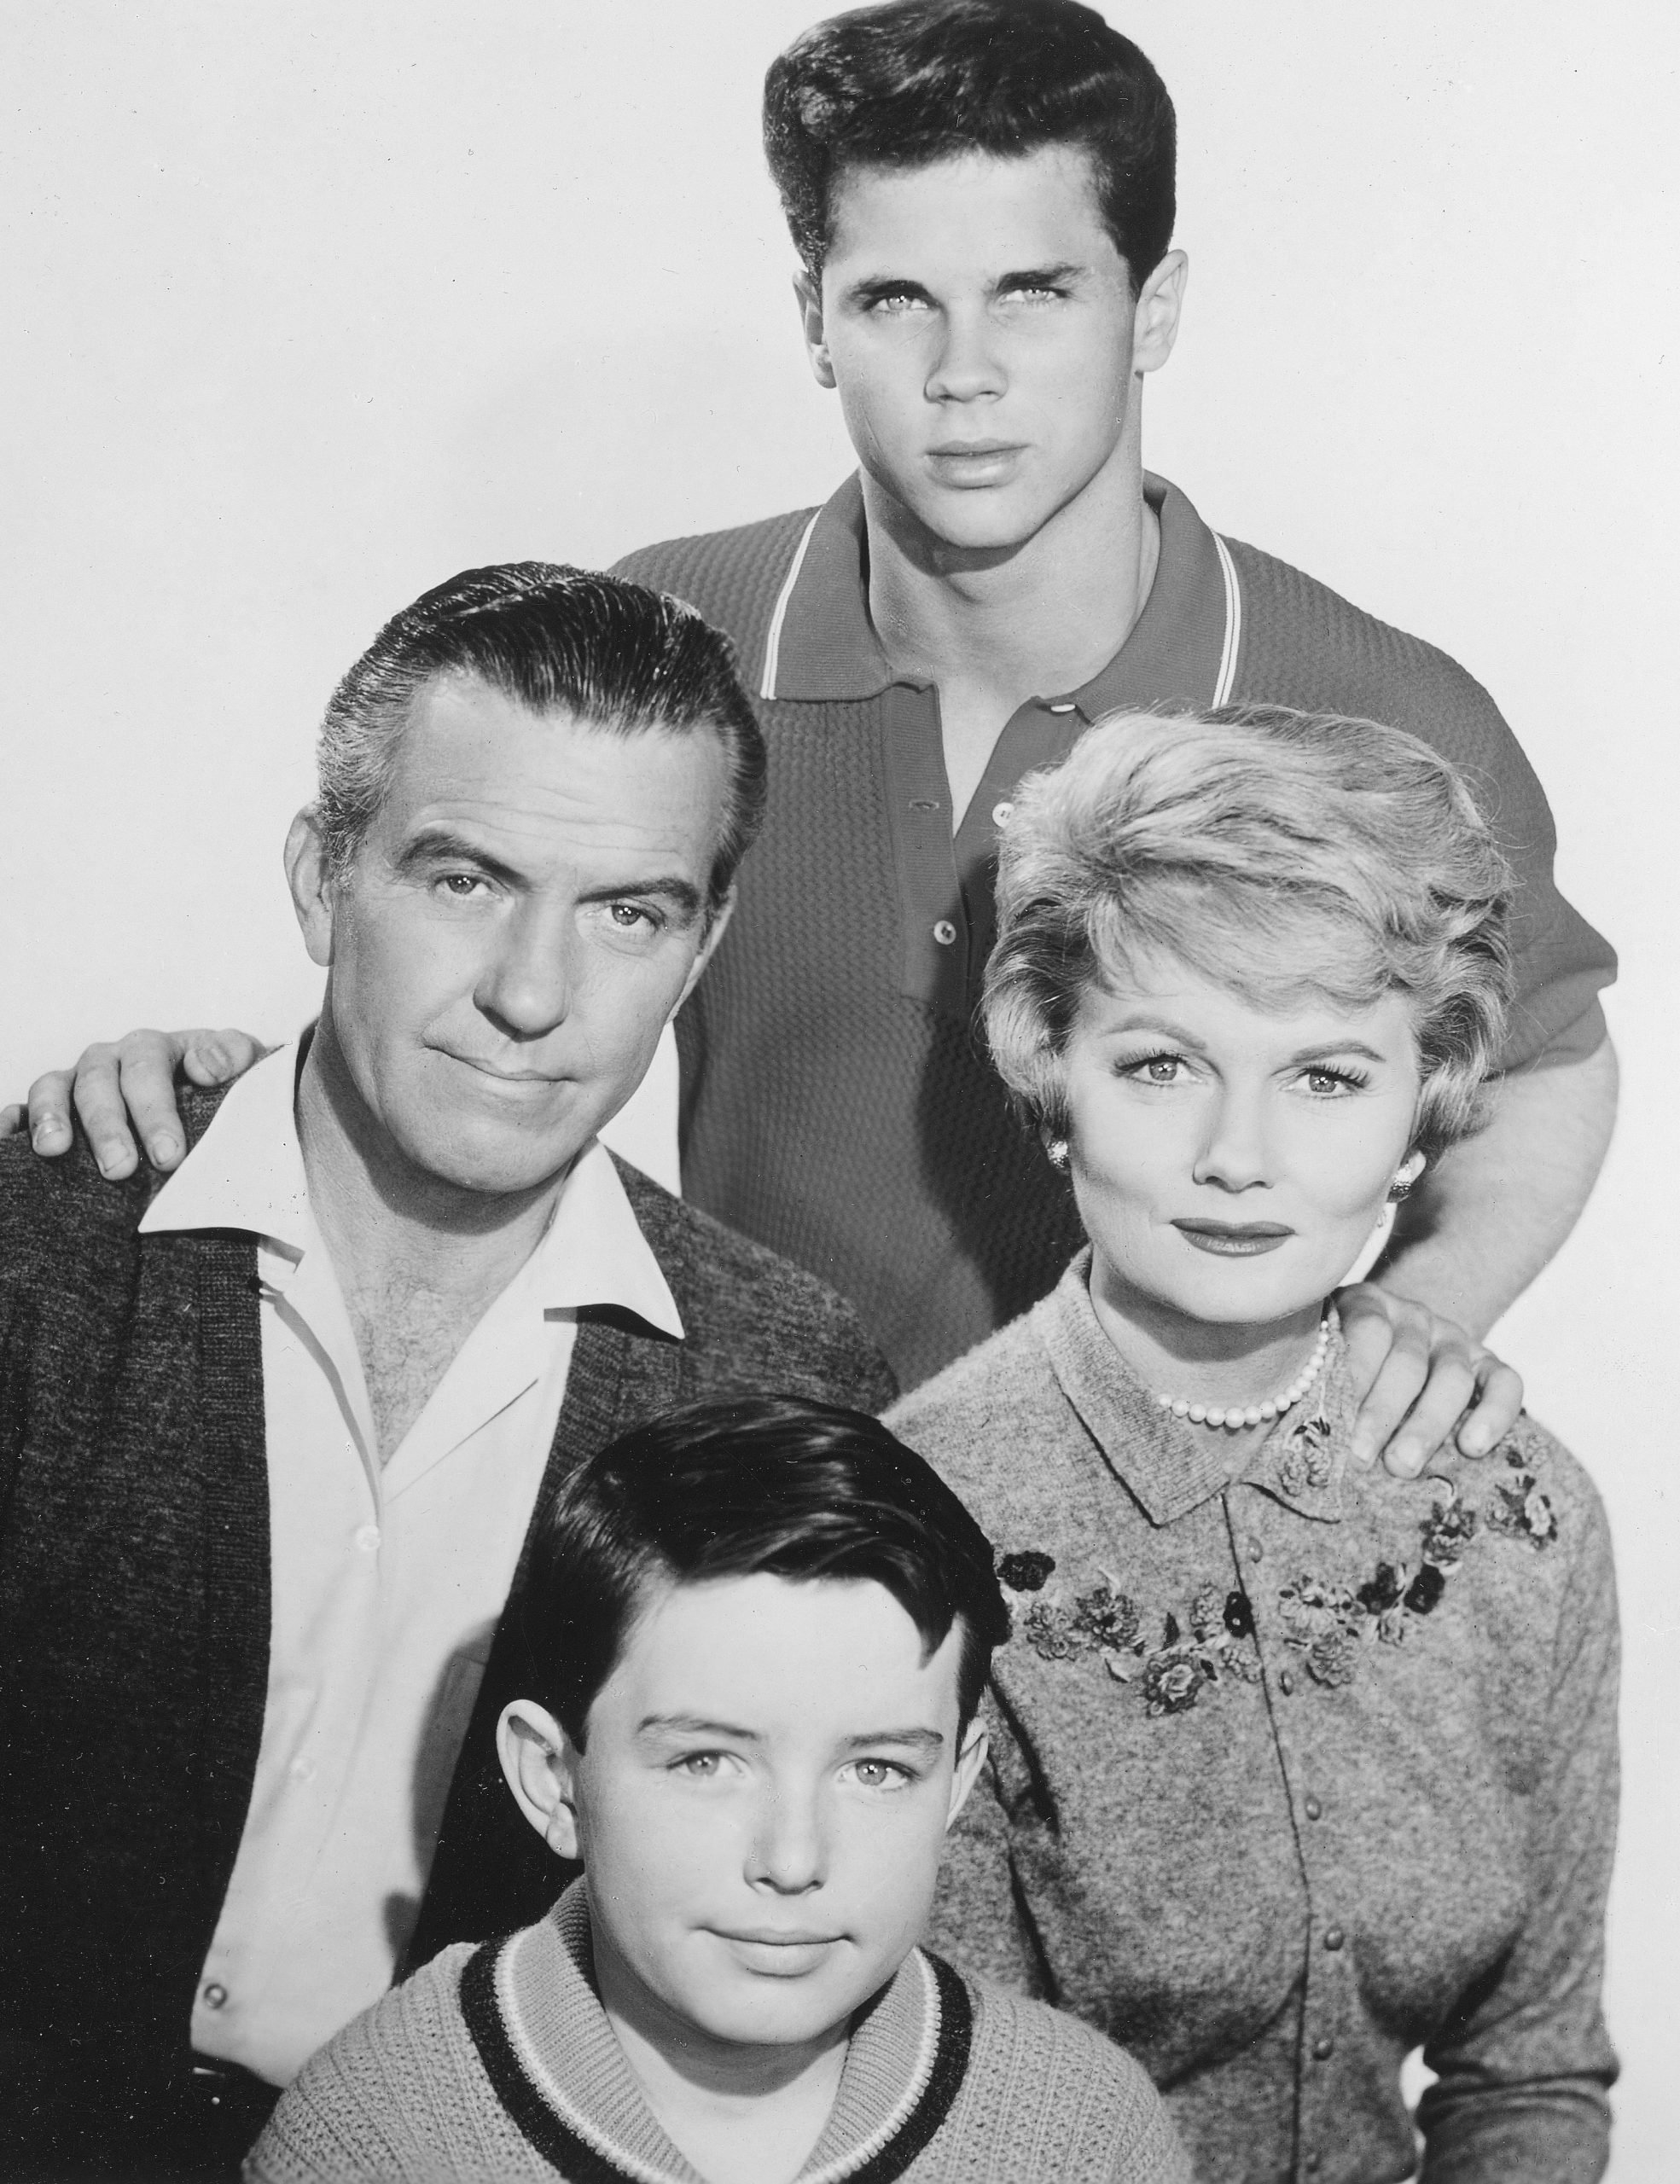 Jerry Mathers as Beaver Cleaver, Hugh Beaumont as Ward Cleaver, Barbara Billingsley as June Cleaver and Tony Dow as Wally Cleaver in a promotional photo for 'Leave It to Beaver'